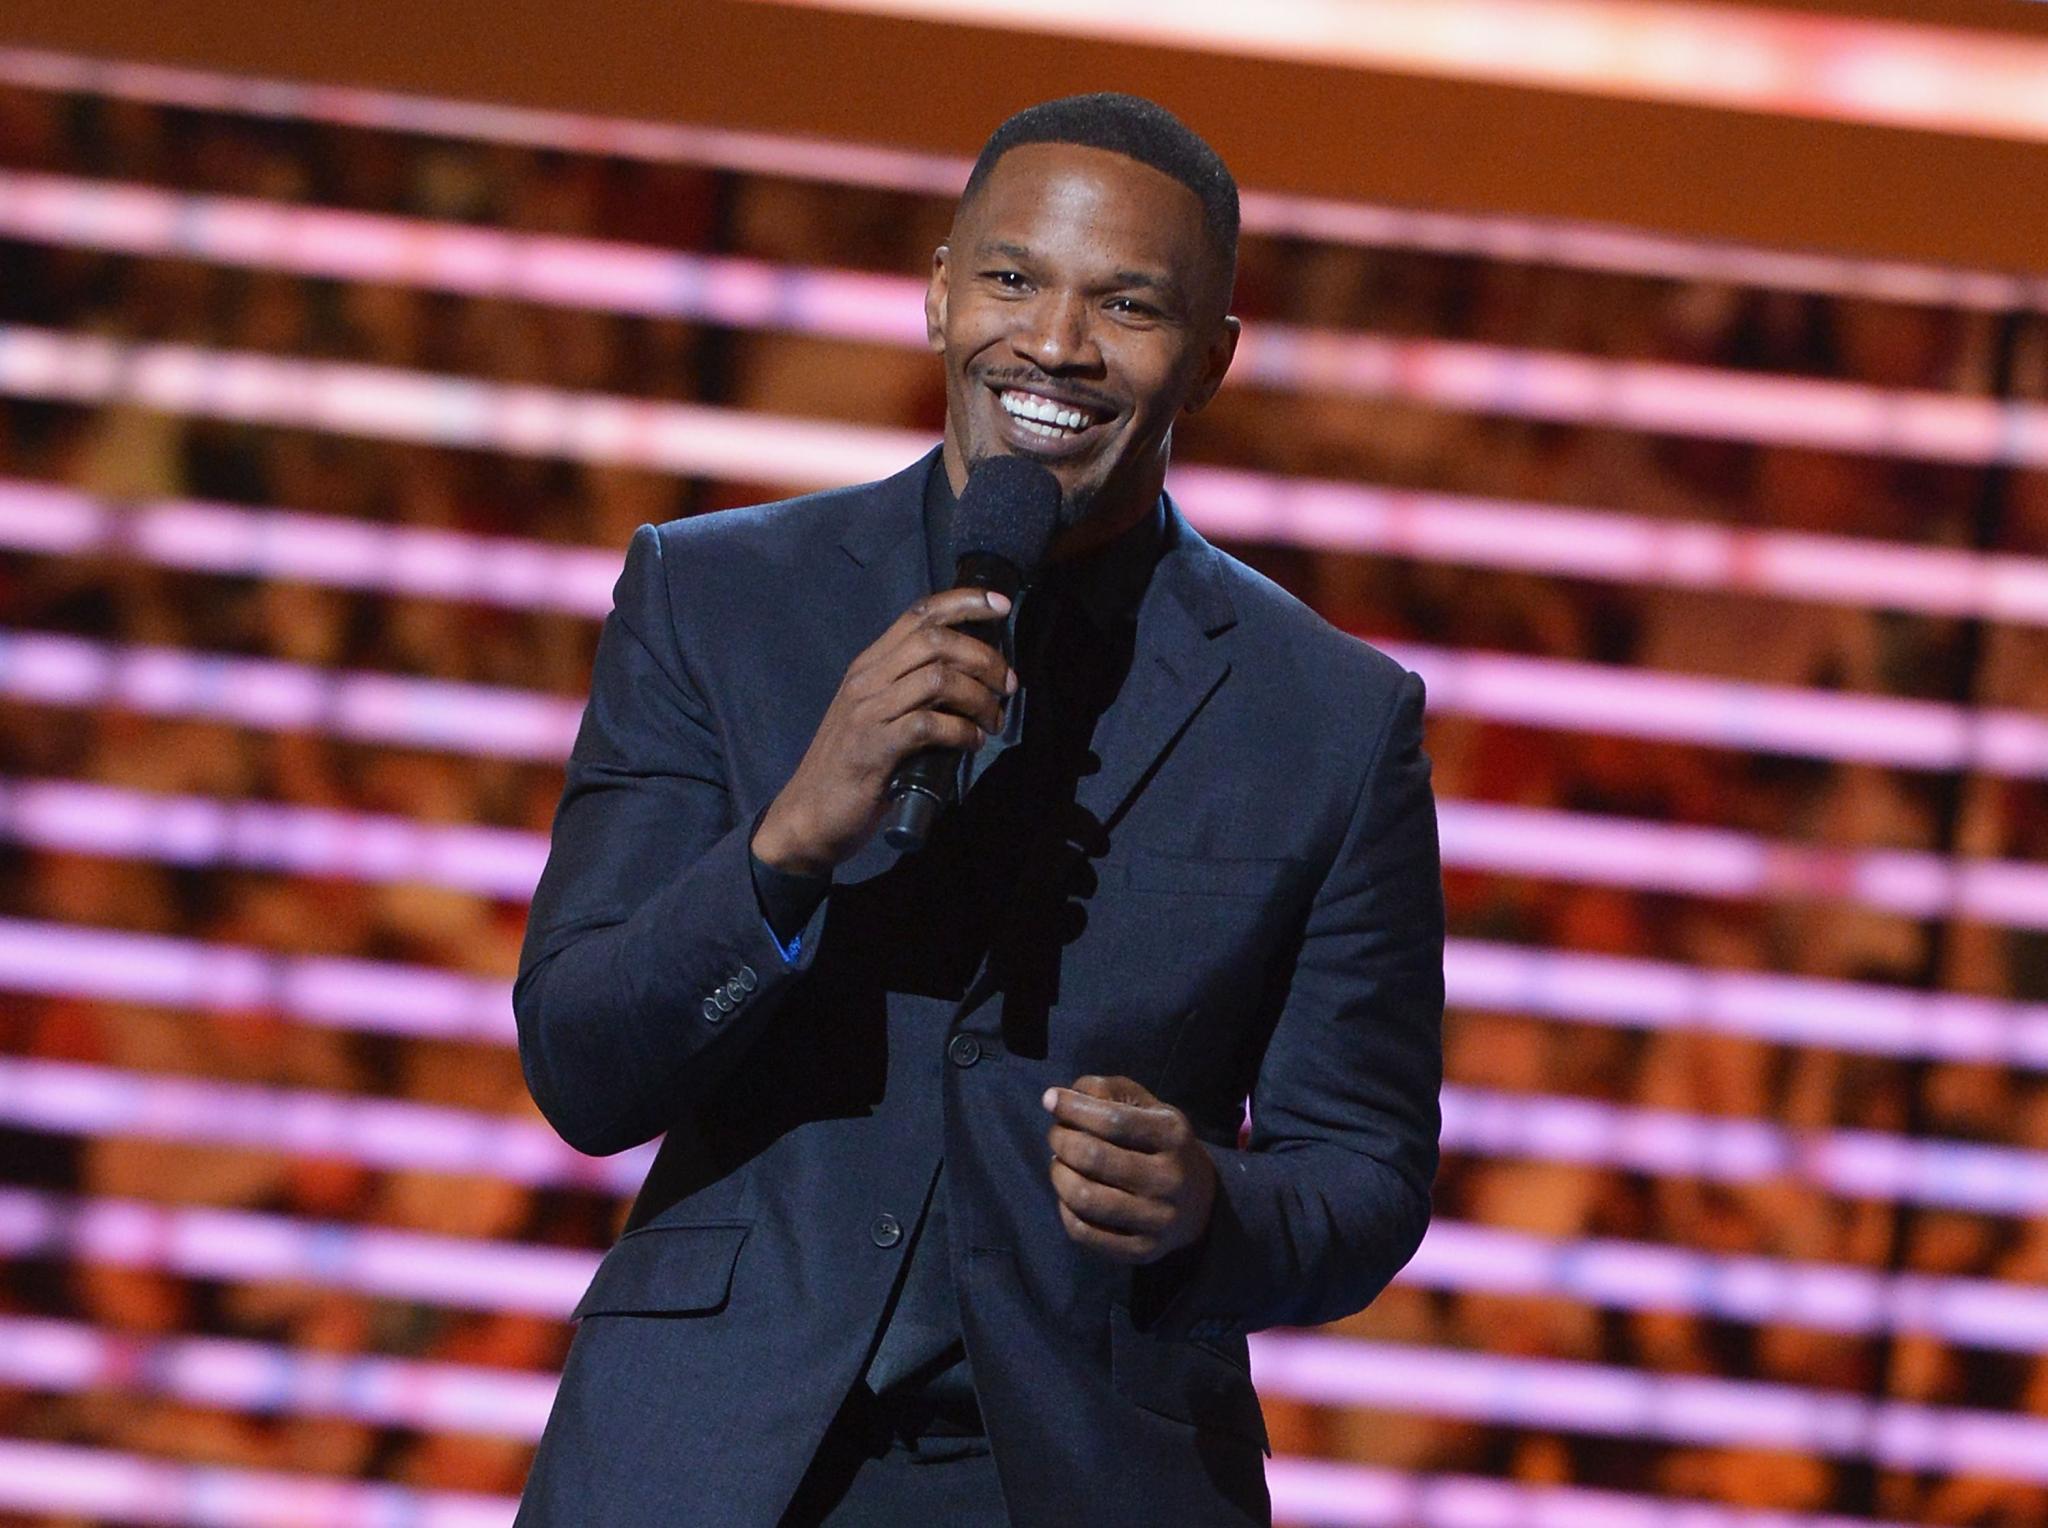 Marvin Gaye’s Family Gave Jamie Foxx Their Blessing To Tell His Life Story On TV